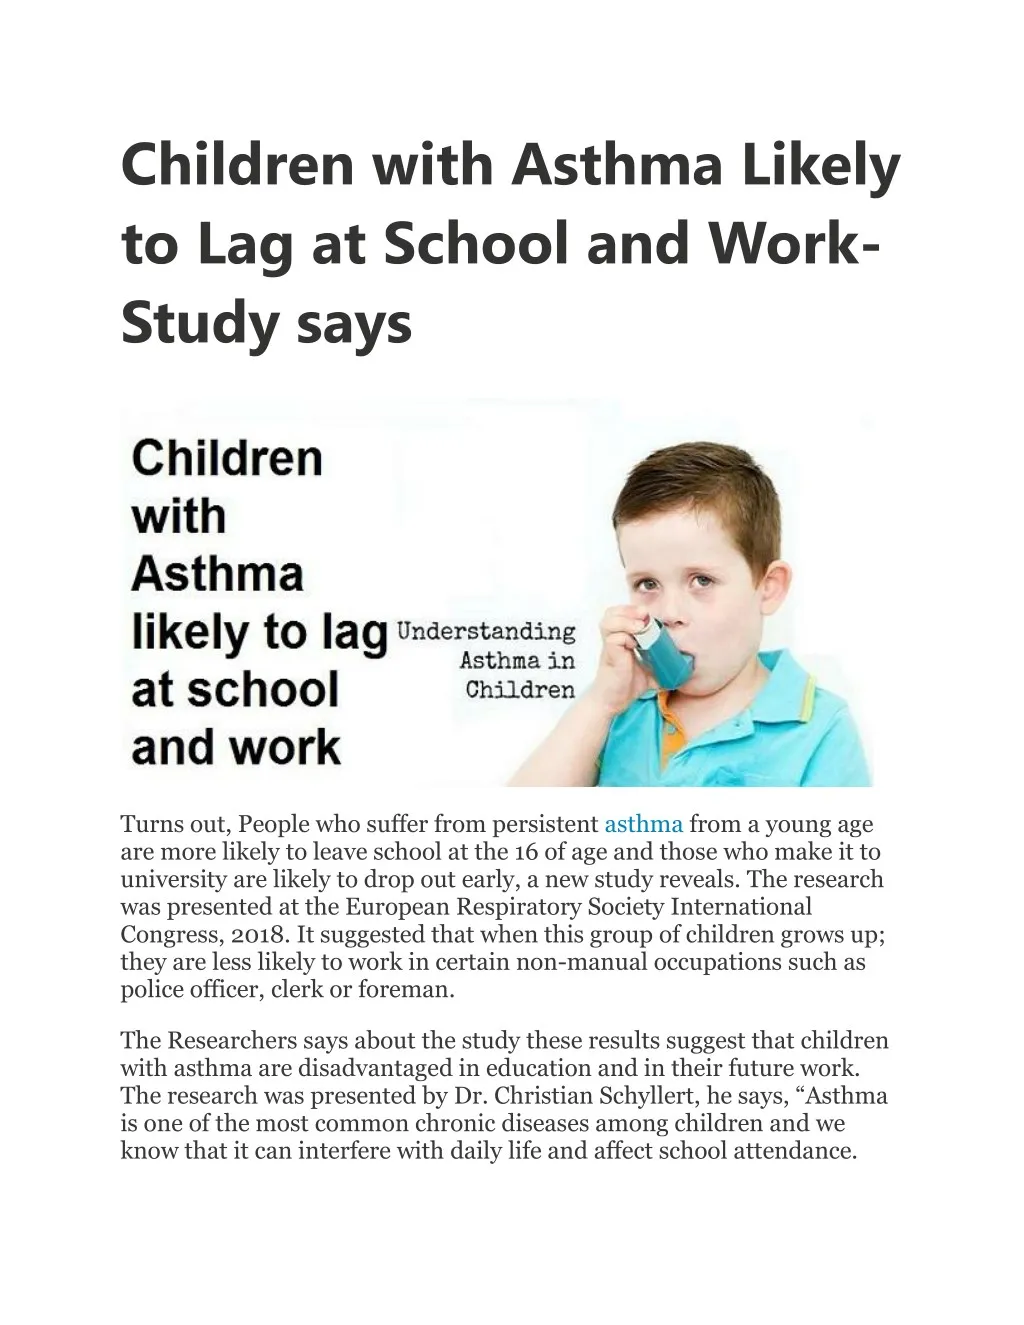 children with asthma likely to lag at school